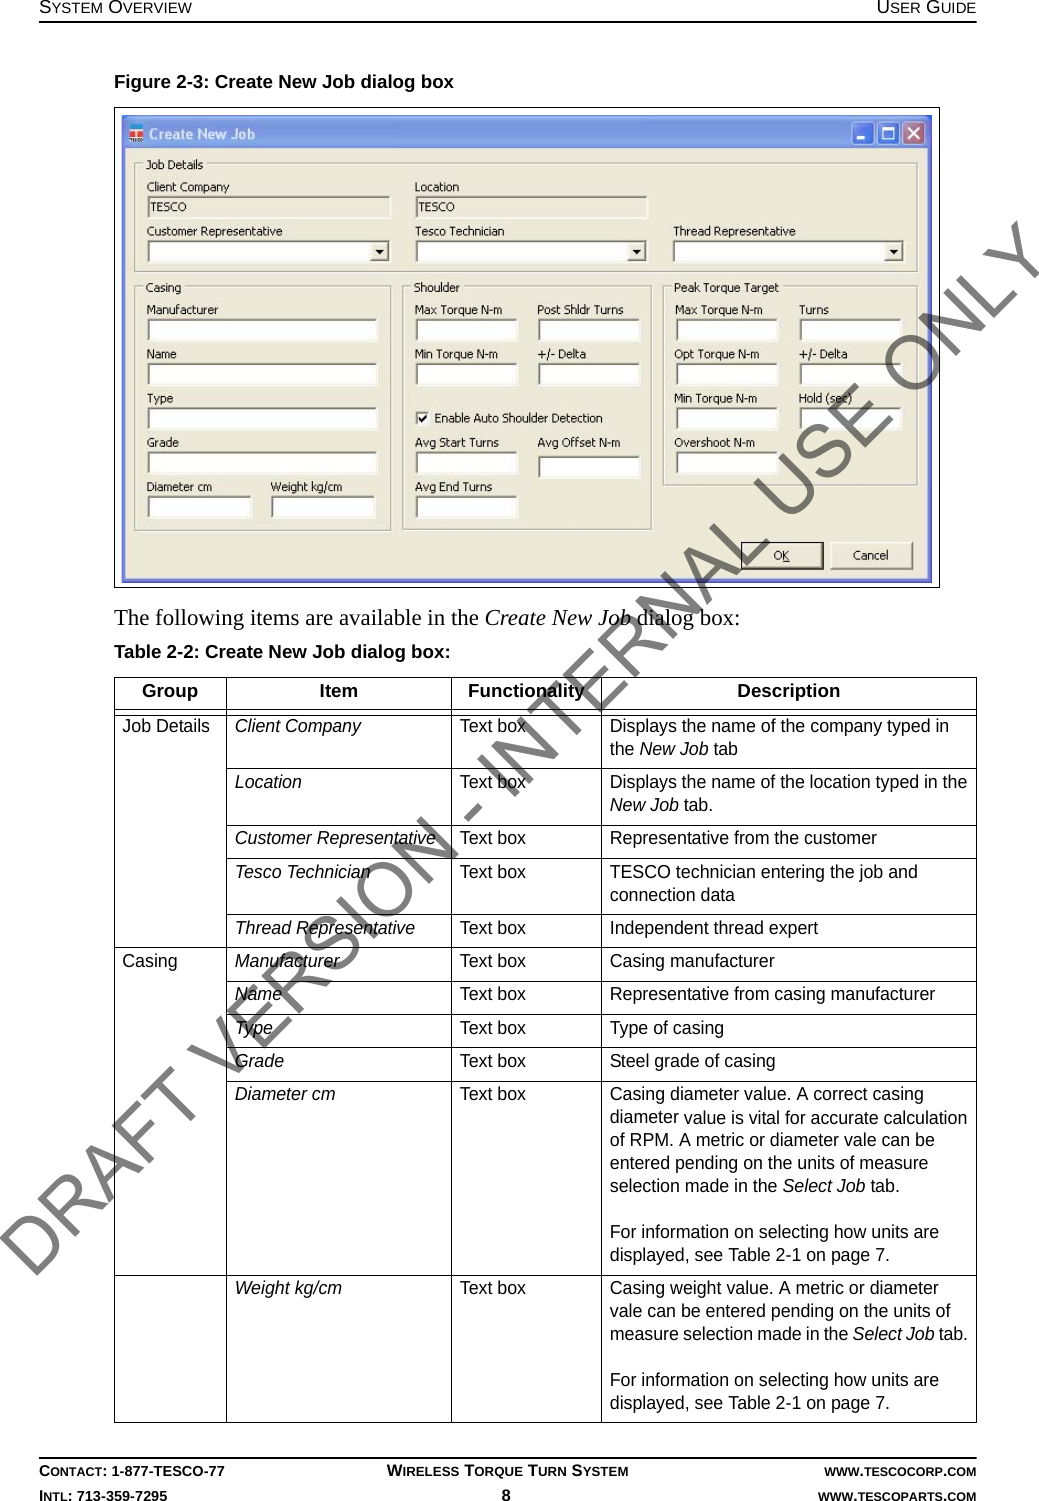 SYSTEM OVERVIEW USER GUIDECONTACT: 1-877-TESCO-77 WIRELESS TORQUE TURN SYSTEM WWW.TESCOCORP.COMINTL: 713-359-7295 8   WWW.TESCOPARTS.COMThe following items are available in the Create New Job dialog box:Figure 2-3: Create New Job dialog boxTable 2-2: Create New Job dialog box:Group Item Functionality DescriptionJob Details Client Company  Text box Displays the name of the company typed in the New Job tabLocation  Text box Displays the name of the location typed in the New Job tab.Customer Representative  Text box Representative from the customer Tesco Technician Text box TESCO technician entering the job and connection dataThread Representative Text box Independent thread expertCasing Manufacturer Text box Casing manufacturerName Text box Representative from casing manufacturerType Text box Type of casingGrade Text box Steel grade of casingDiameter cm Text box Casing diameter value. A correct casing diameter value is vital for accurate calculation of RPM. A metric or diameter vale can be entered pending on the units of measure selection made in the Select Job tab. For information on selecting how units are displayed, see Table 2-1 on page 7.Weight kg/cm Text box Casing weight value. A metric or diameter vale can be entered pending on the units of measure selection made in the Select Job tab. For information on selecting how units are displayed, see Table 2-1 on page 7.DRAFT VERSION - INTERNAL USE ONLY